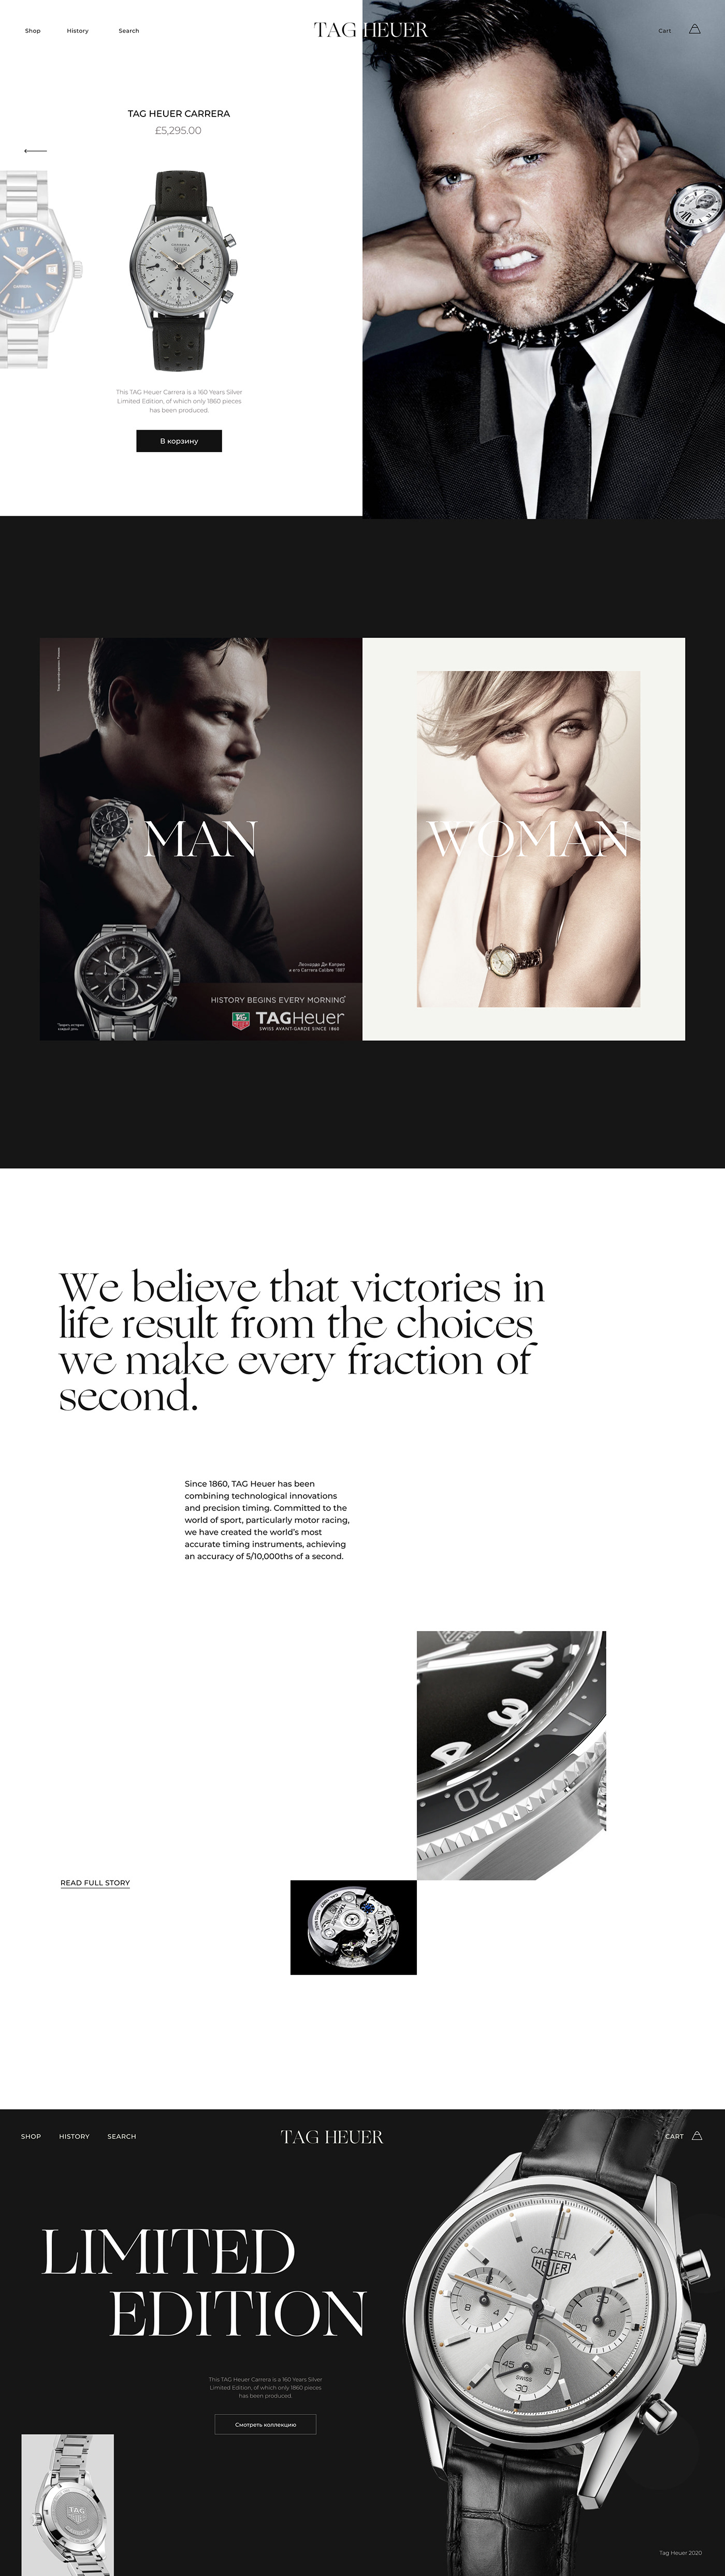 concept e-commerce Fashion  jewelry redesign Retail UI ux/ui watch Watches